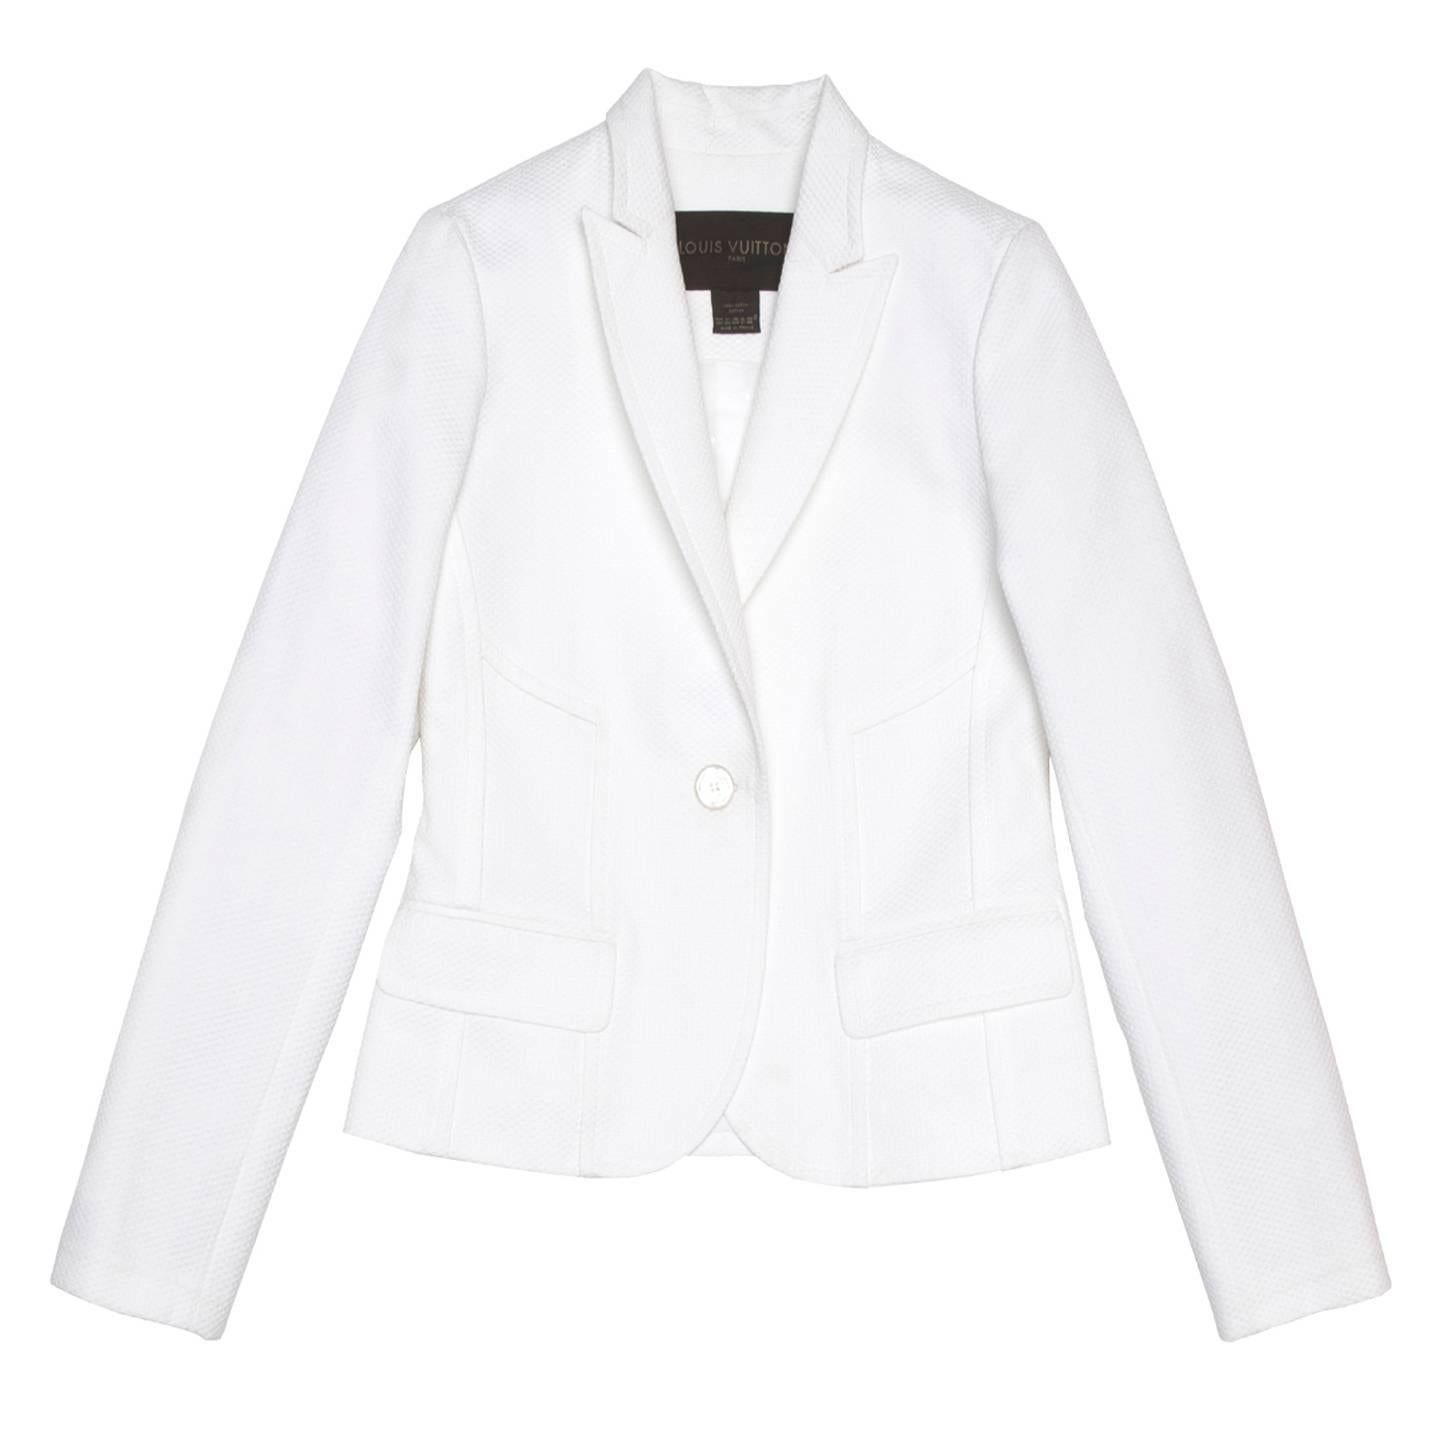 Beautiful white cotton pique short fitted blazer with peaked lapel and rounded front hem. All the seams on the jacket are folded toward the outside and create geometrical effects with a combinations of curves and straight lines. The front is also